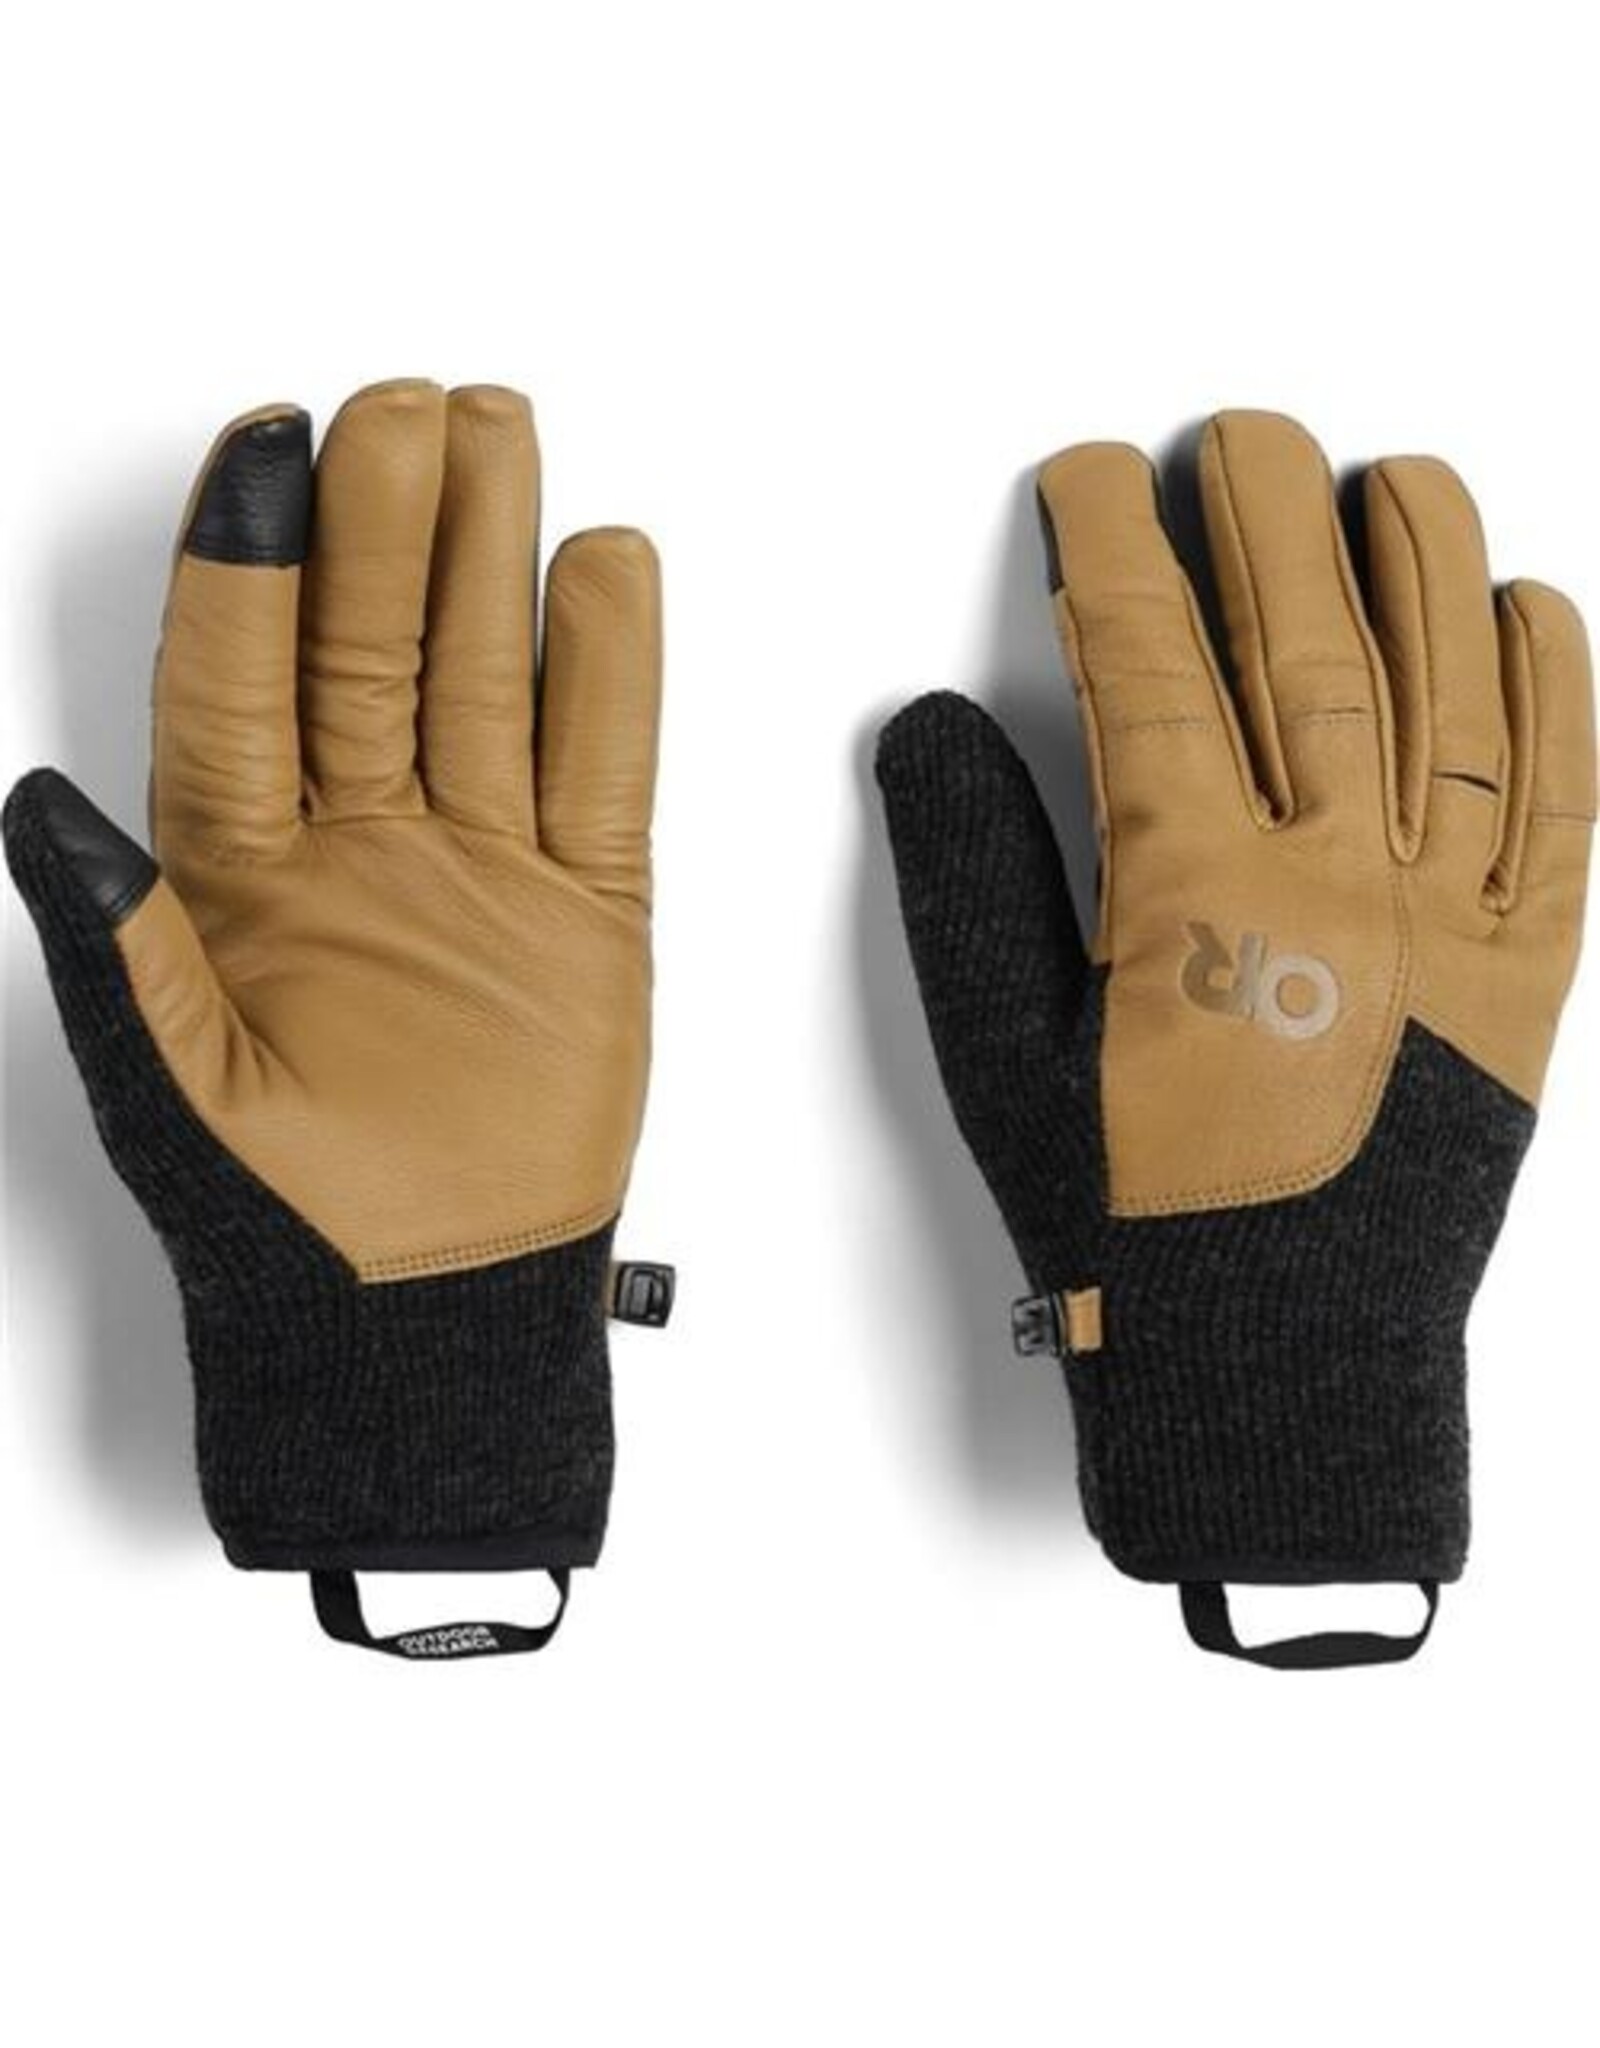 OUTDOOR RESEARCH MEN'S FLURRY DRIVING GLOVES